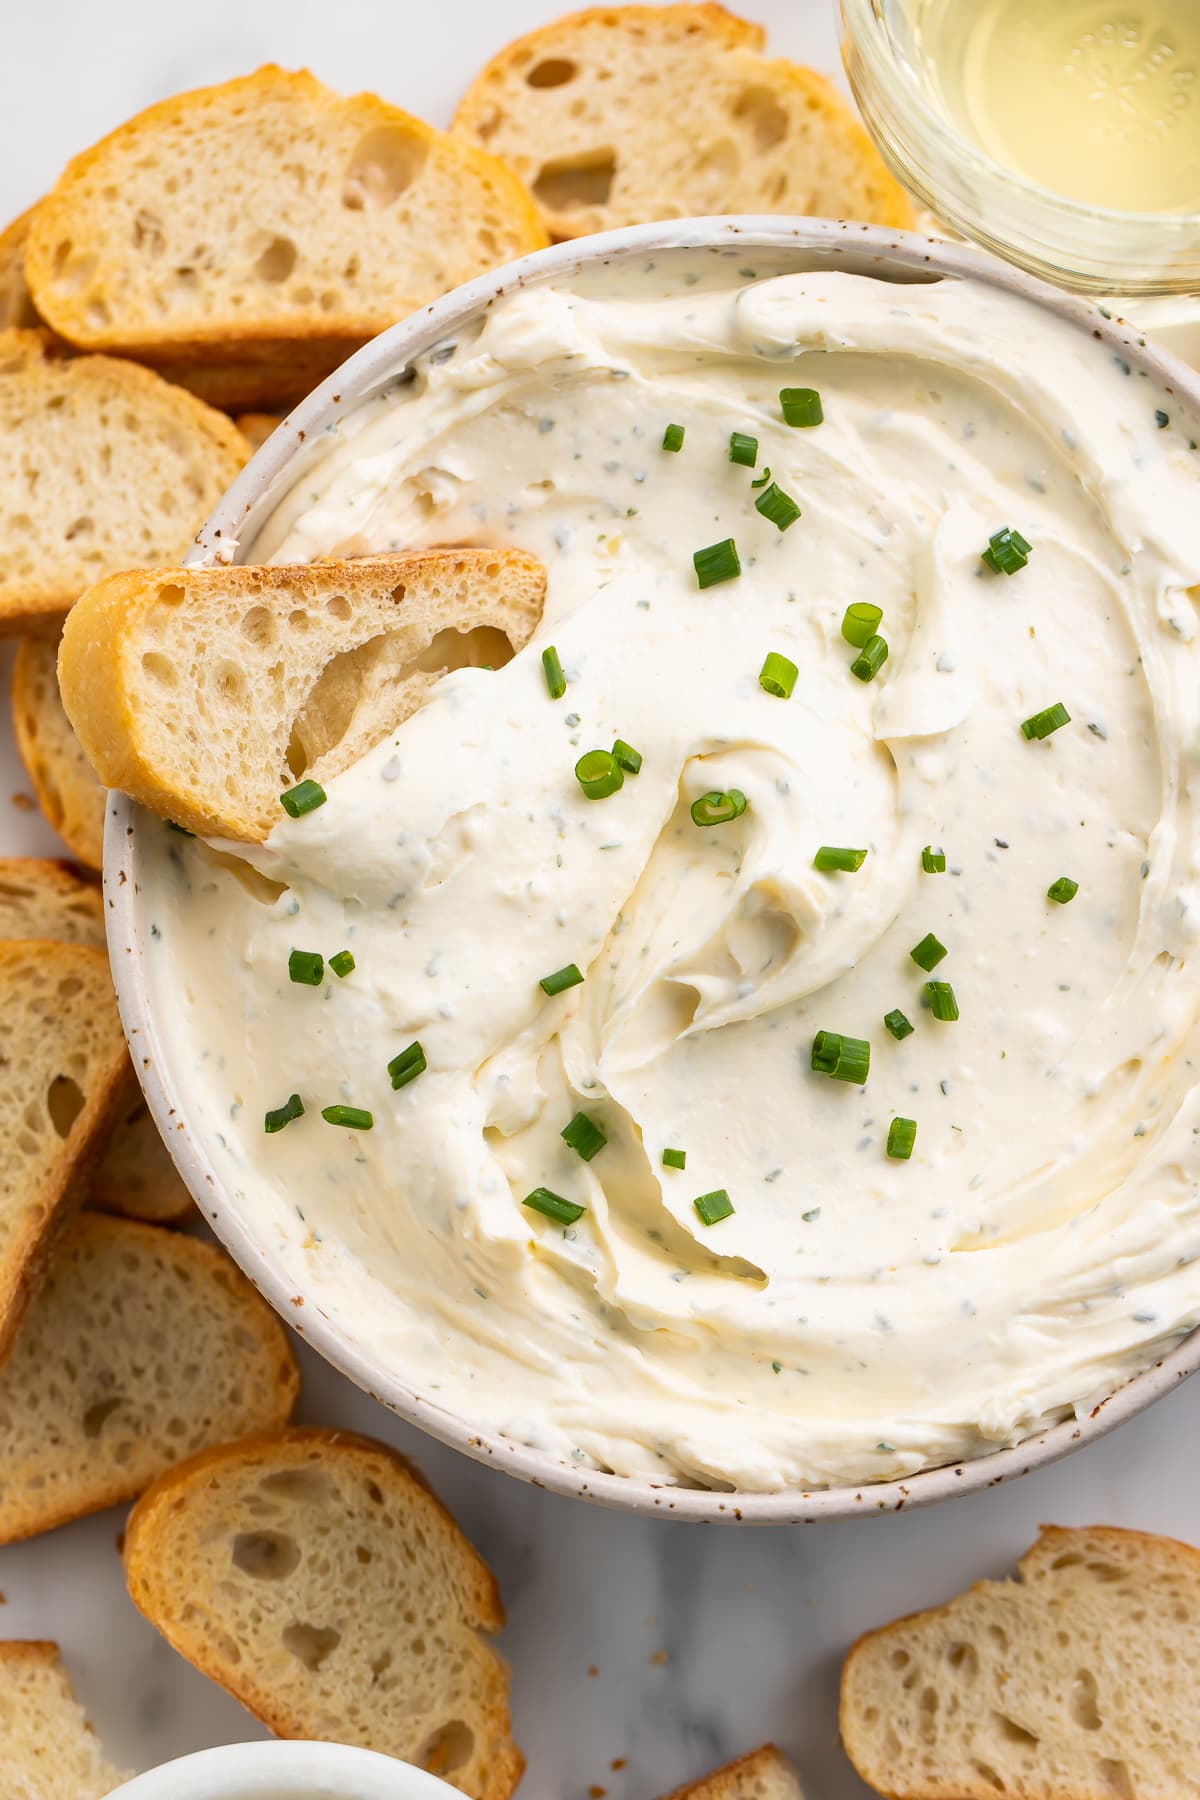 A piece of crisp crostini laying in a bowl of creamy homemade boursin cheese.